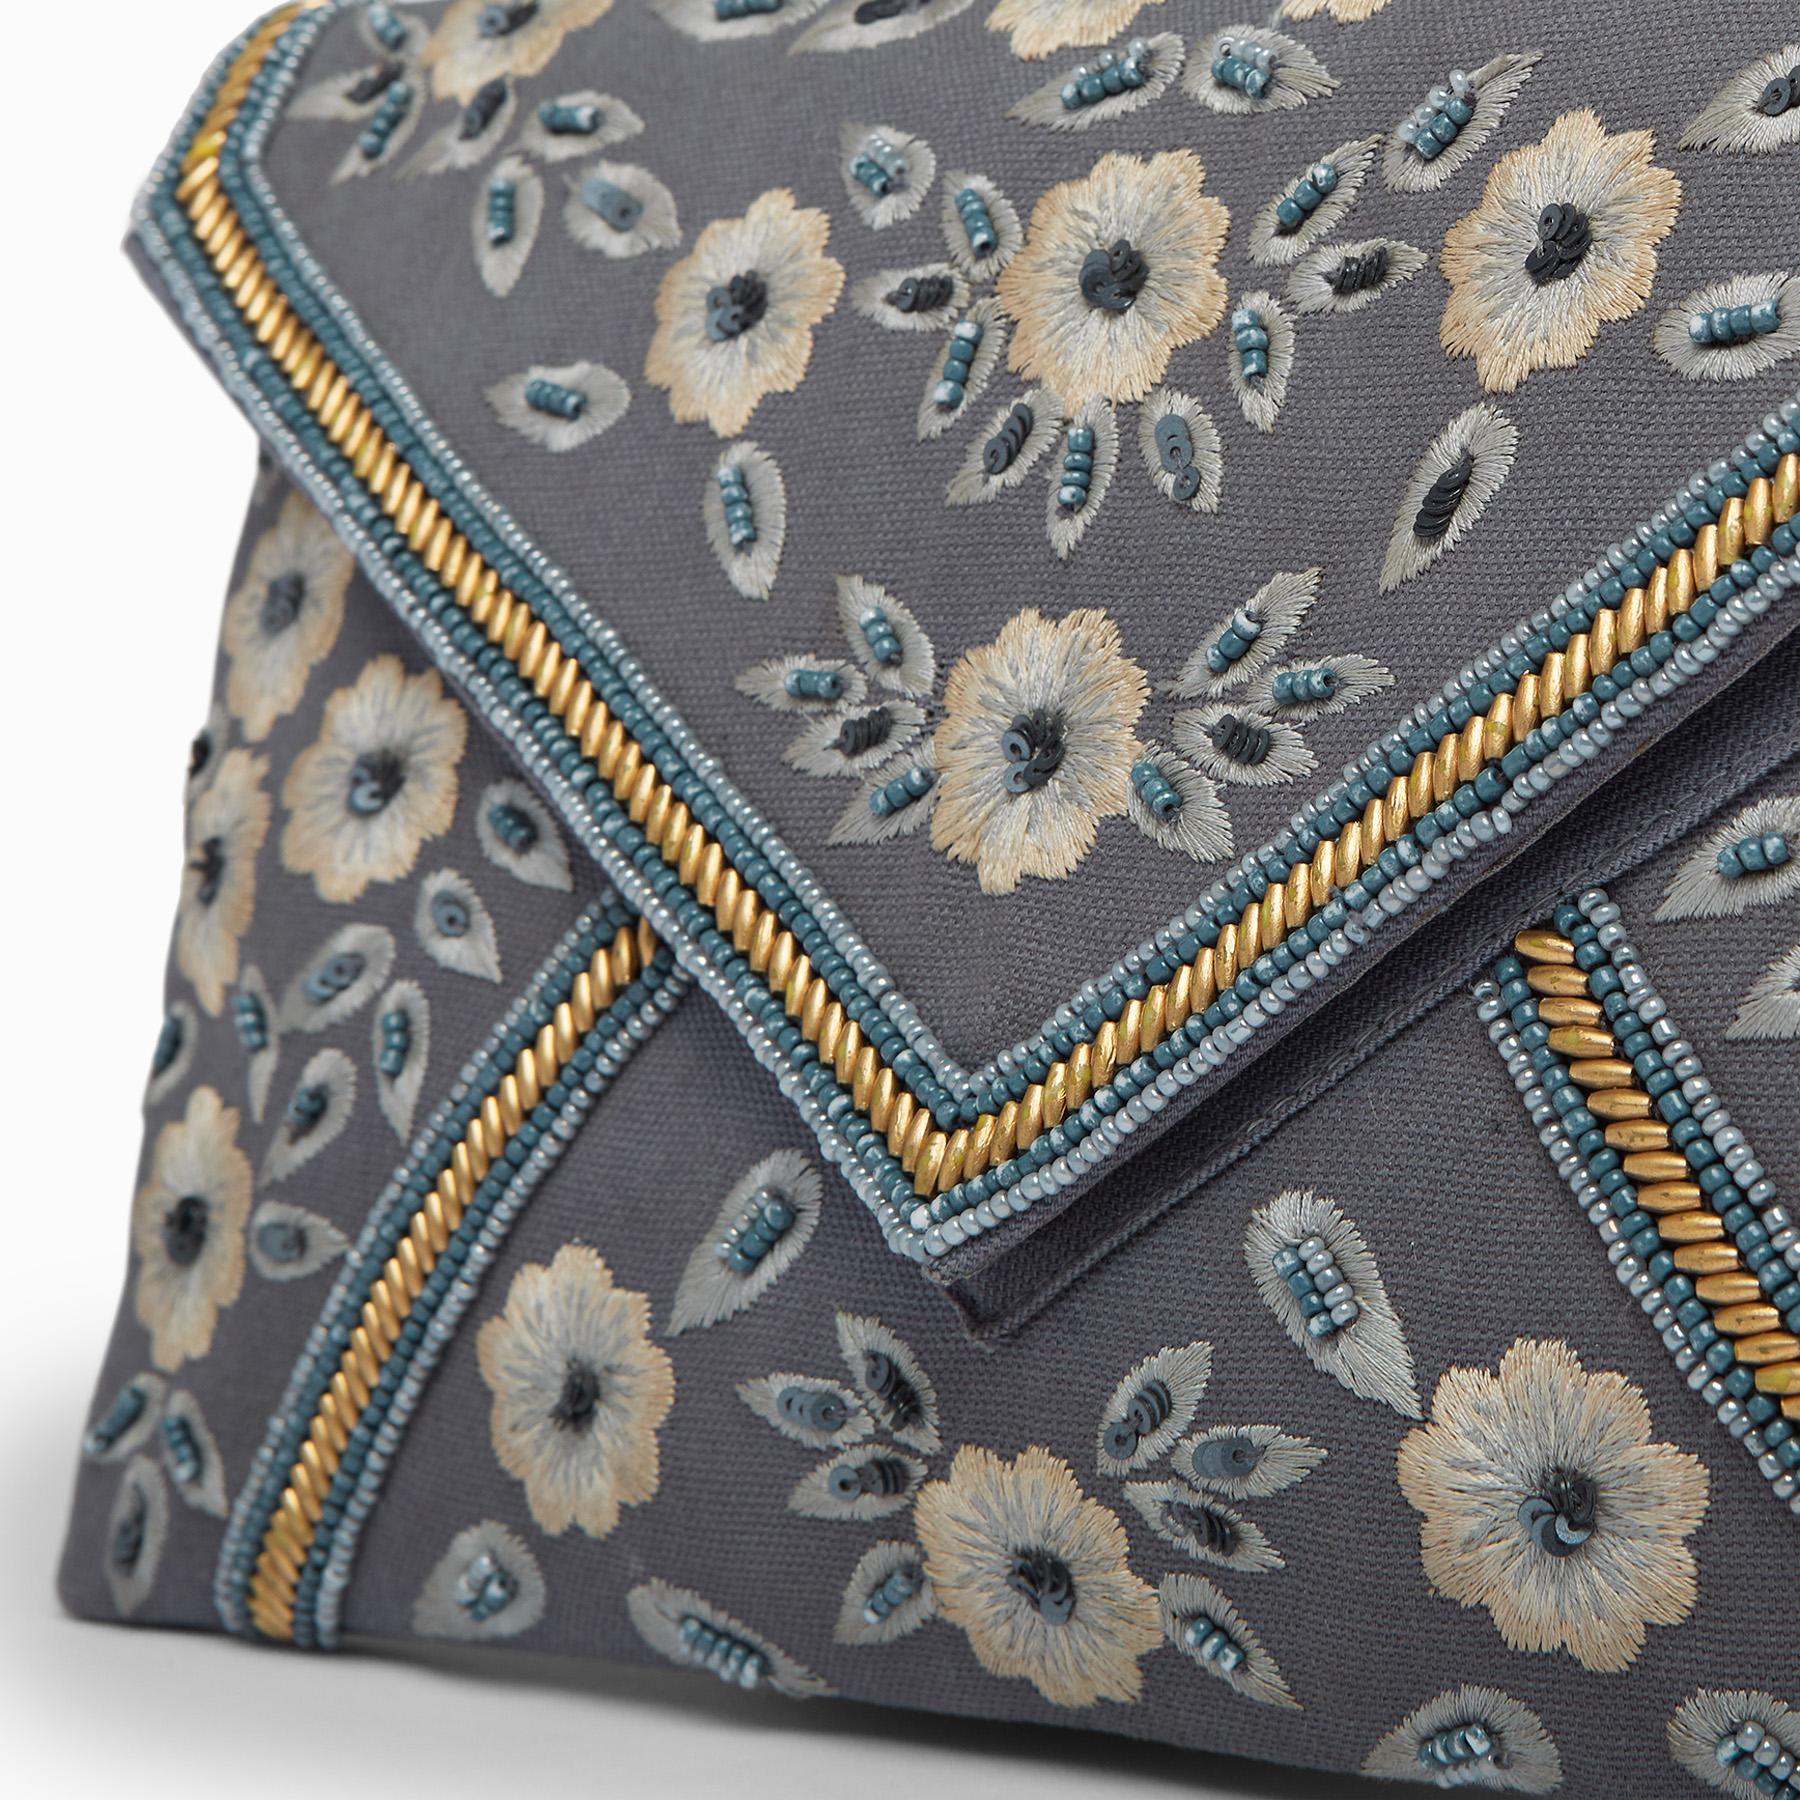 Grey Embroidered Envelope Clutch